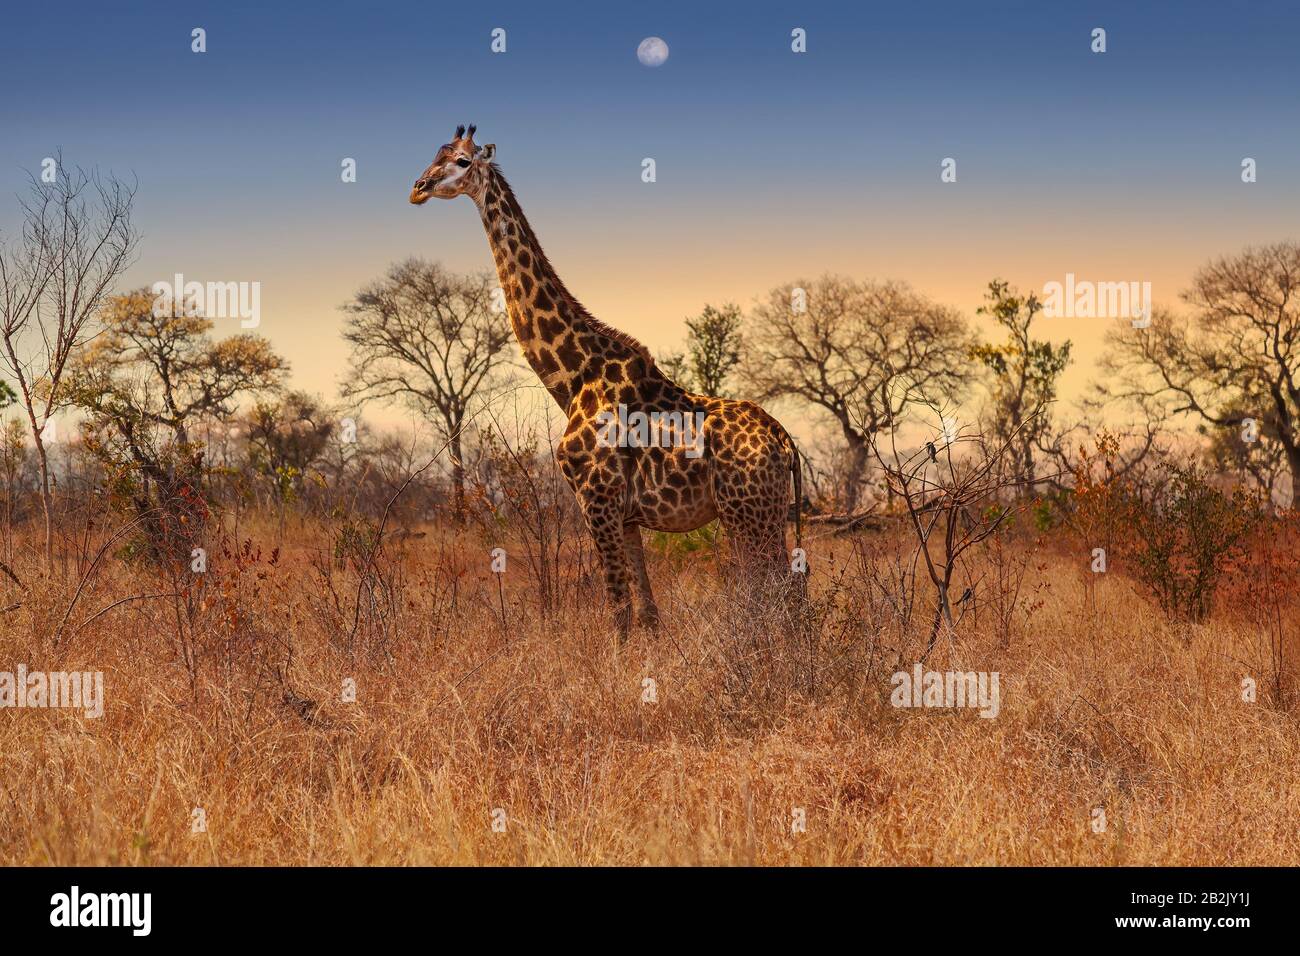 Giraffe in Sunset in Kruger National Park, South Africa Stock Photo